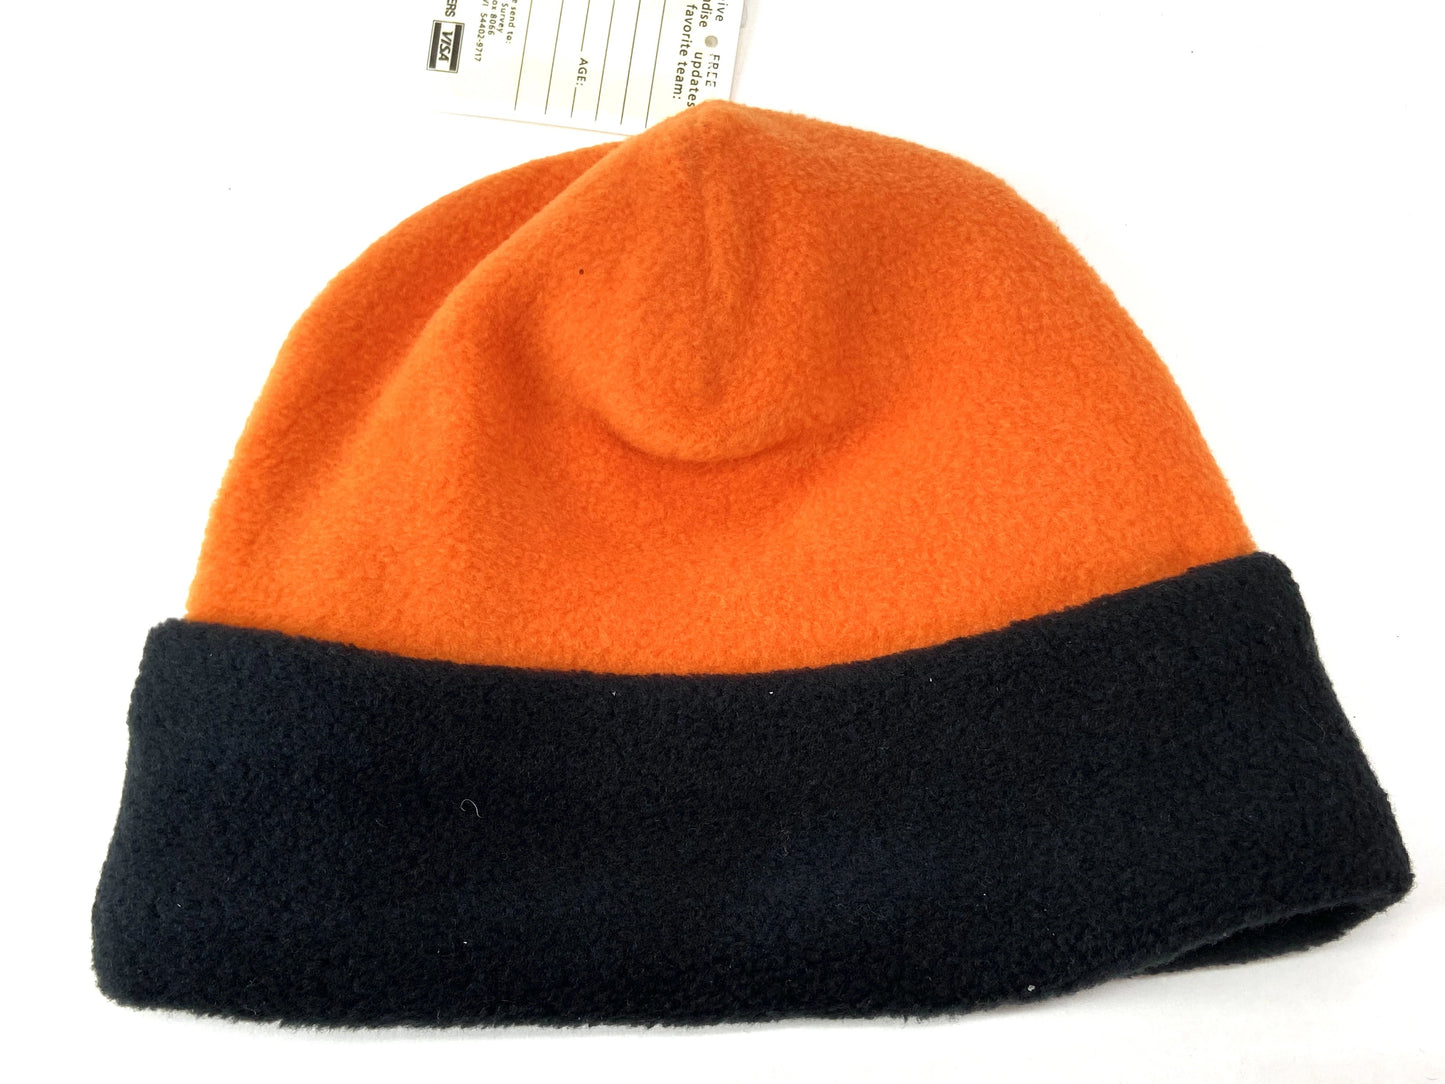 Cincinnati Bengals Vintage NFL Adult and Youth Fleece Logo Knit Hat By Drew Pearson